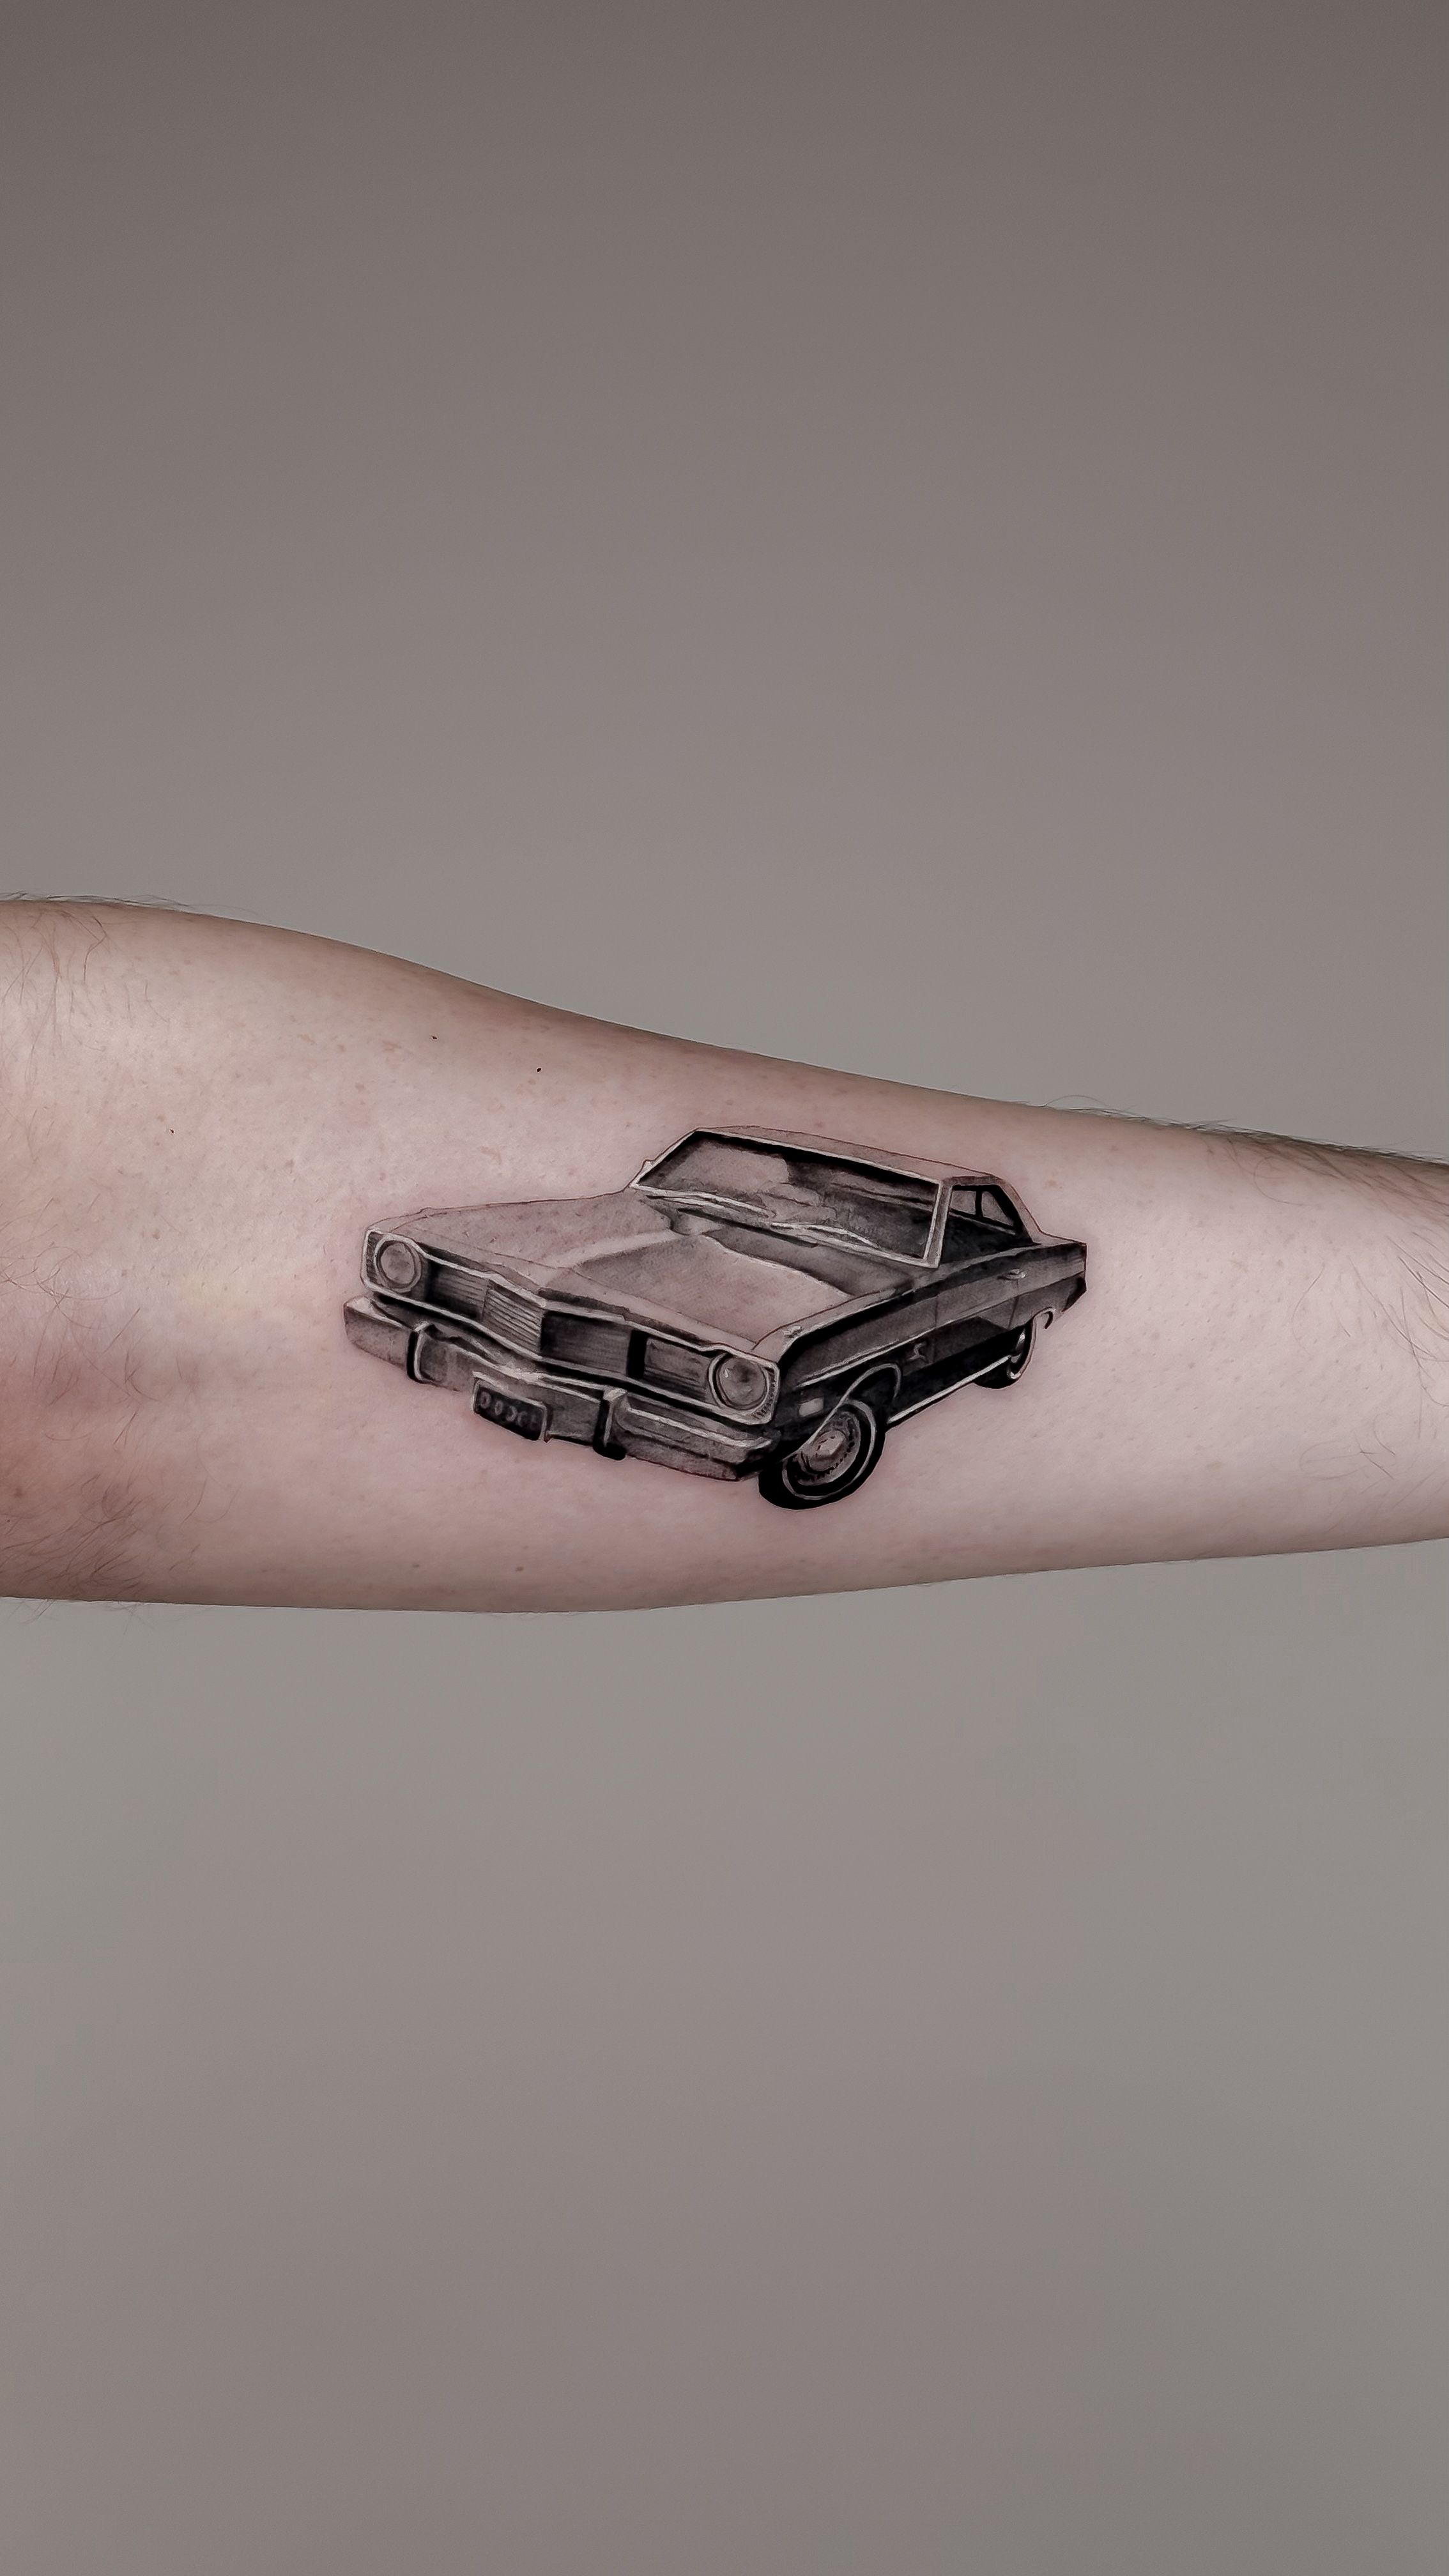 Image Details ISS_2470_00004 - Car Tattoo